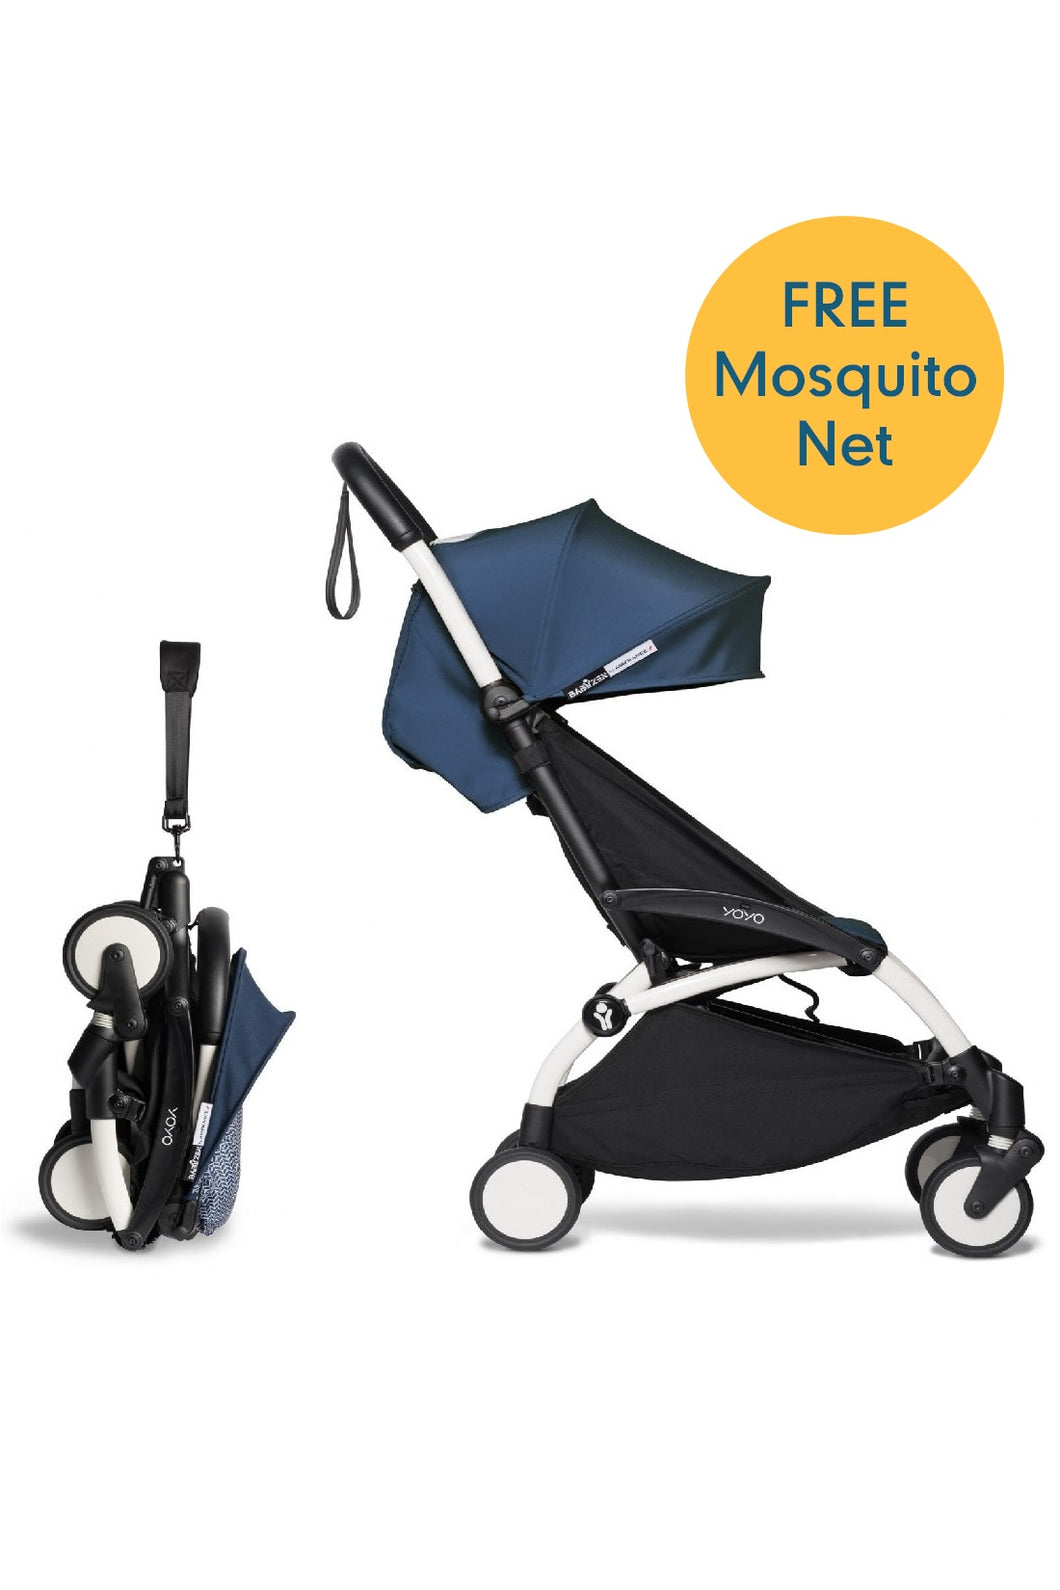 Stokke YOYO² Stroller with 6+ colour pack (Free Mosquito Net)